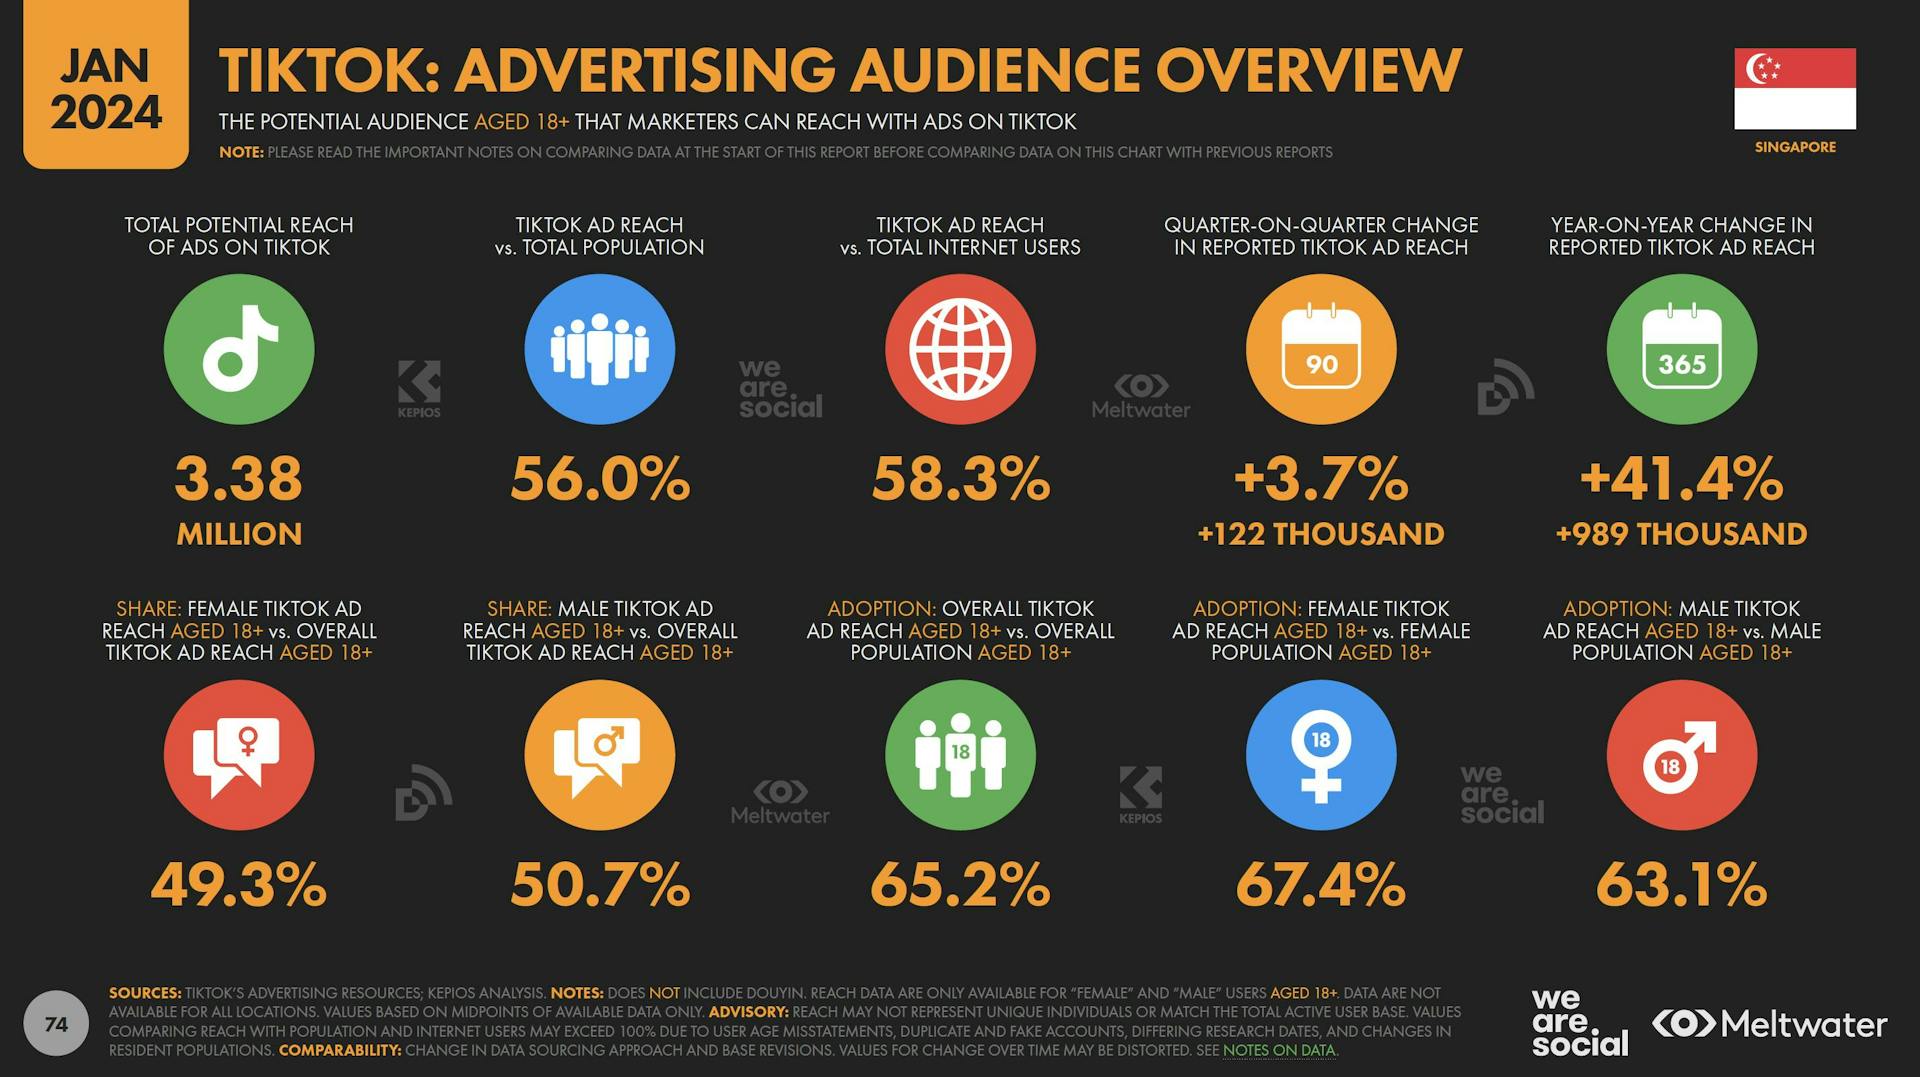 TikTok advertising audience overview based on Global Digital Report 2024 for Singapore